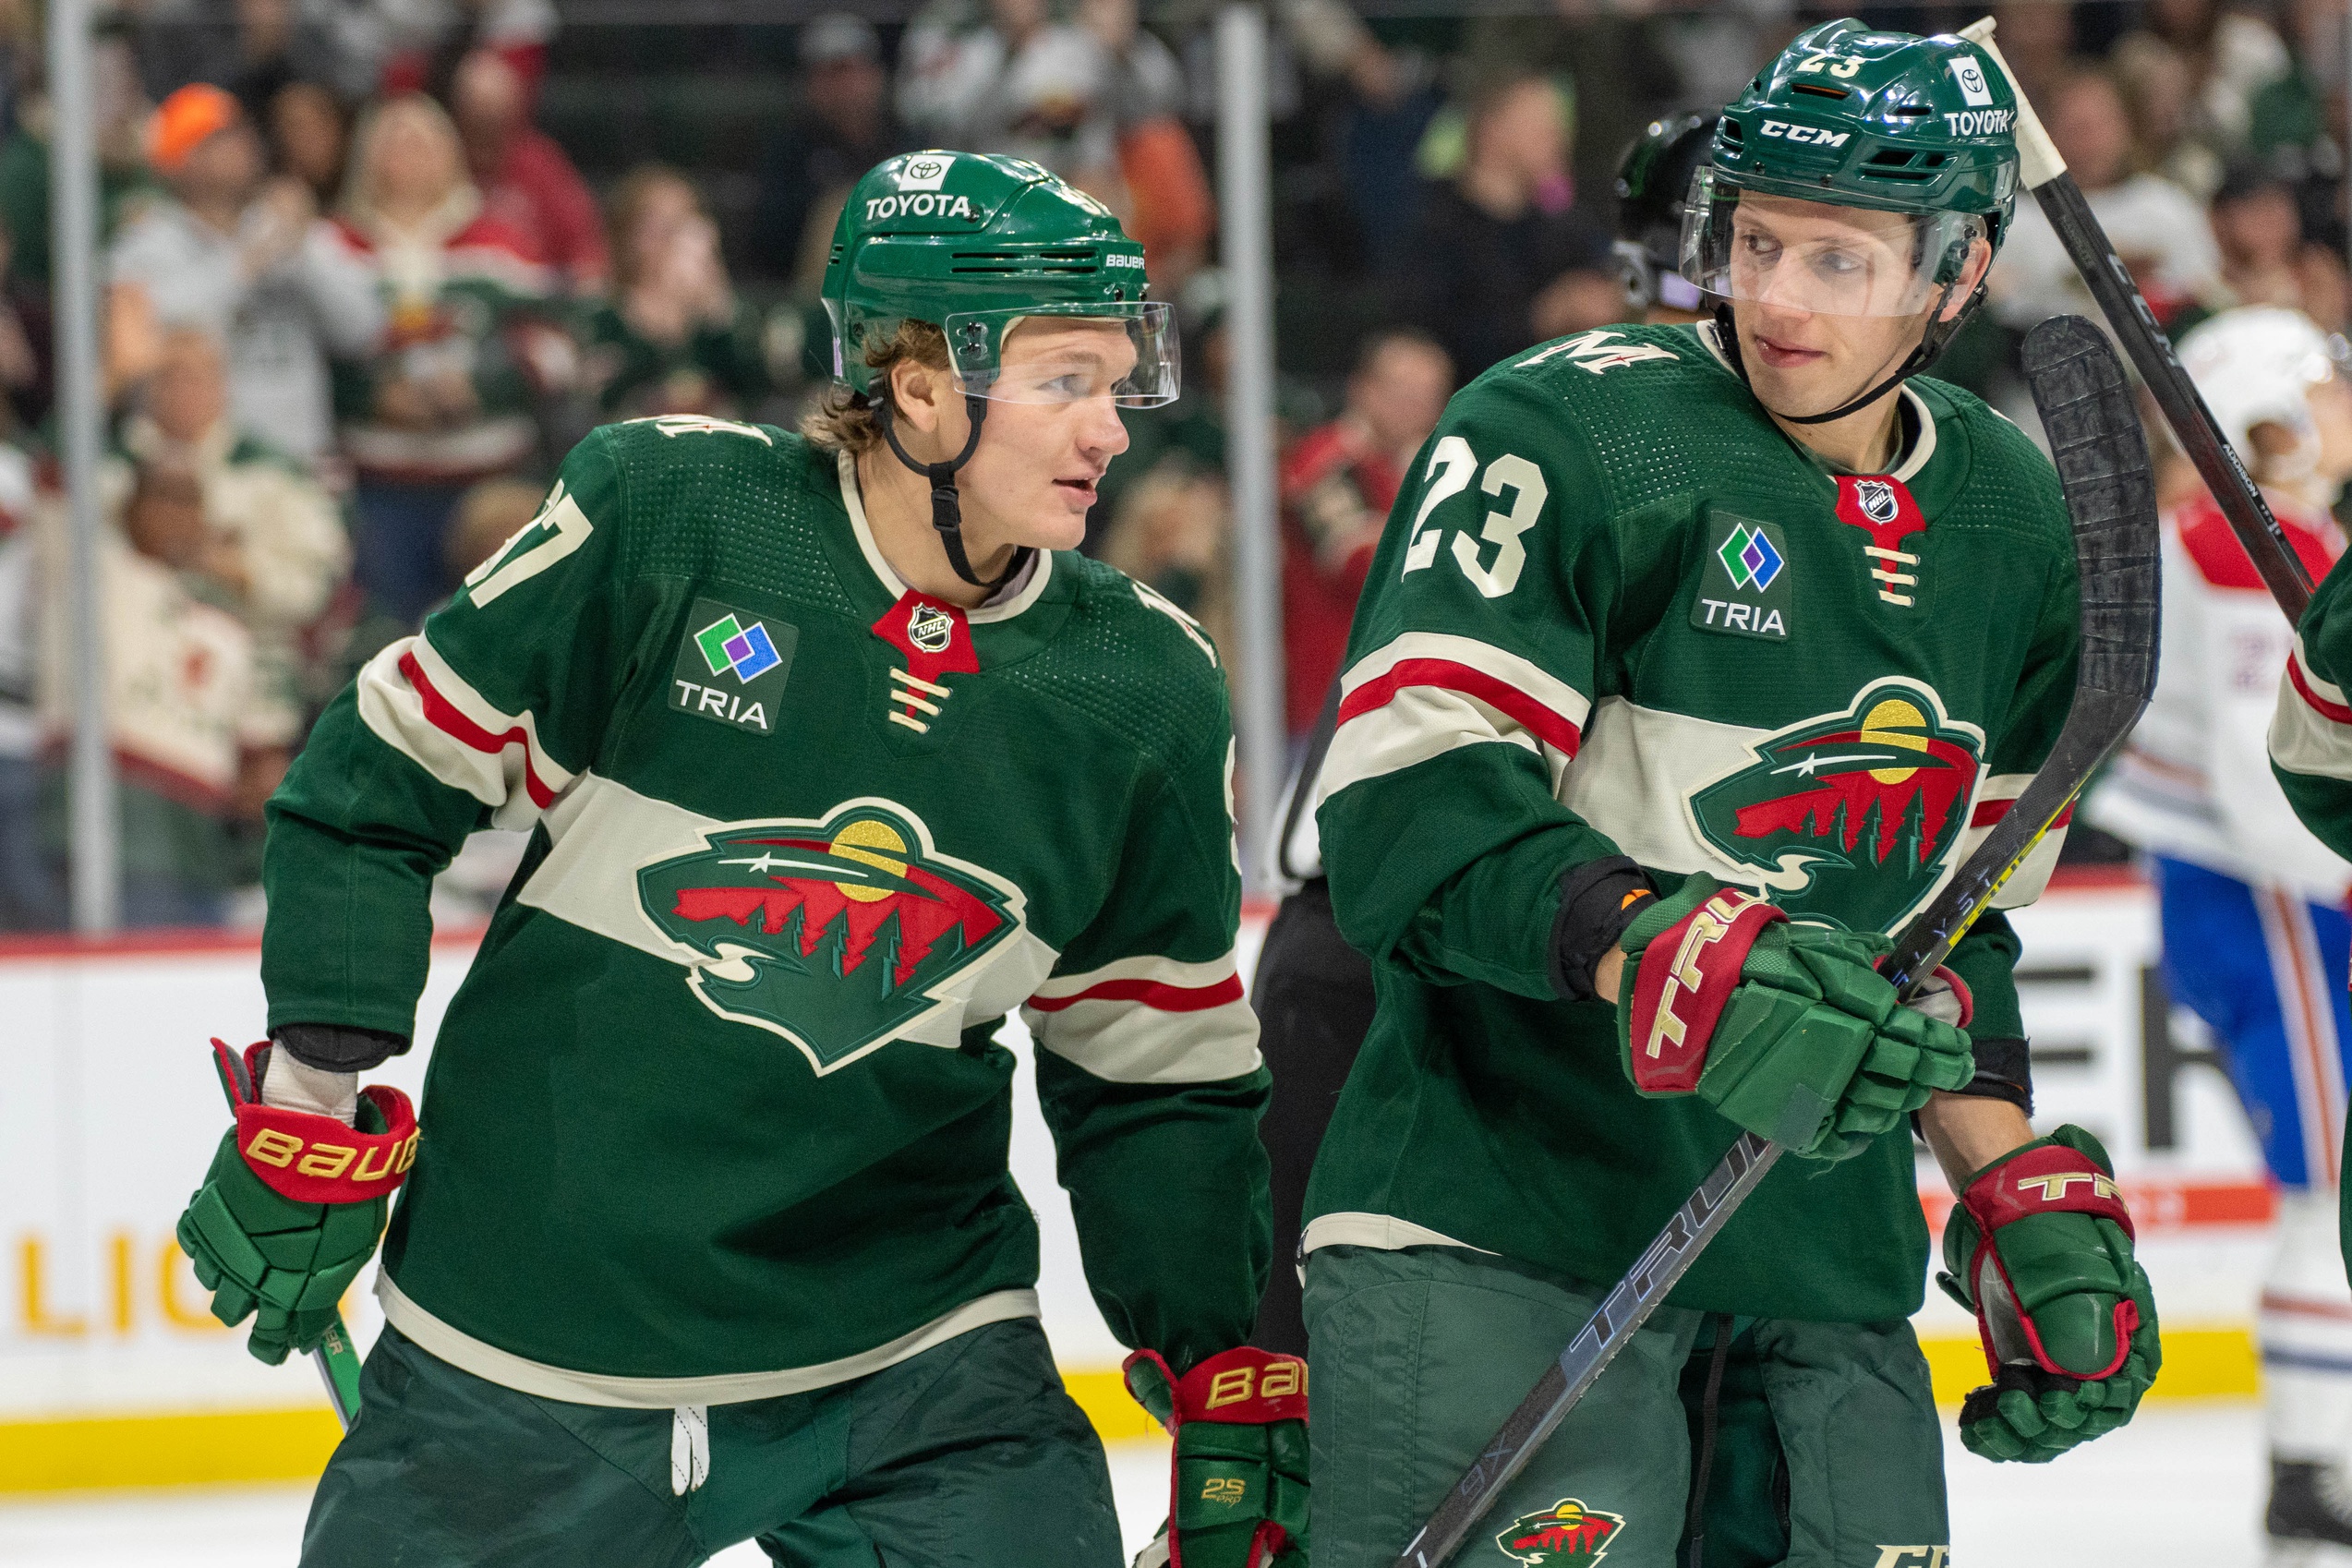 In his first week, Kirill Kaprizov fits in well with Wild